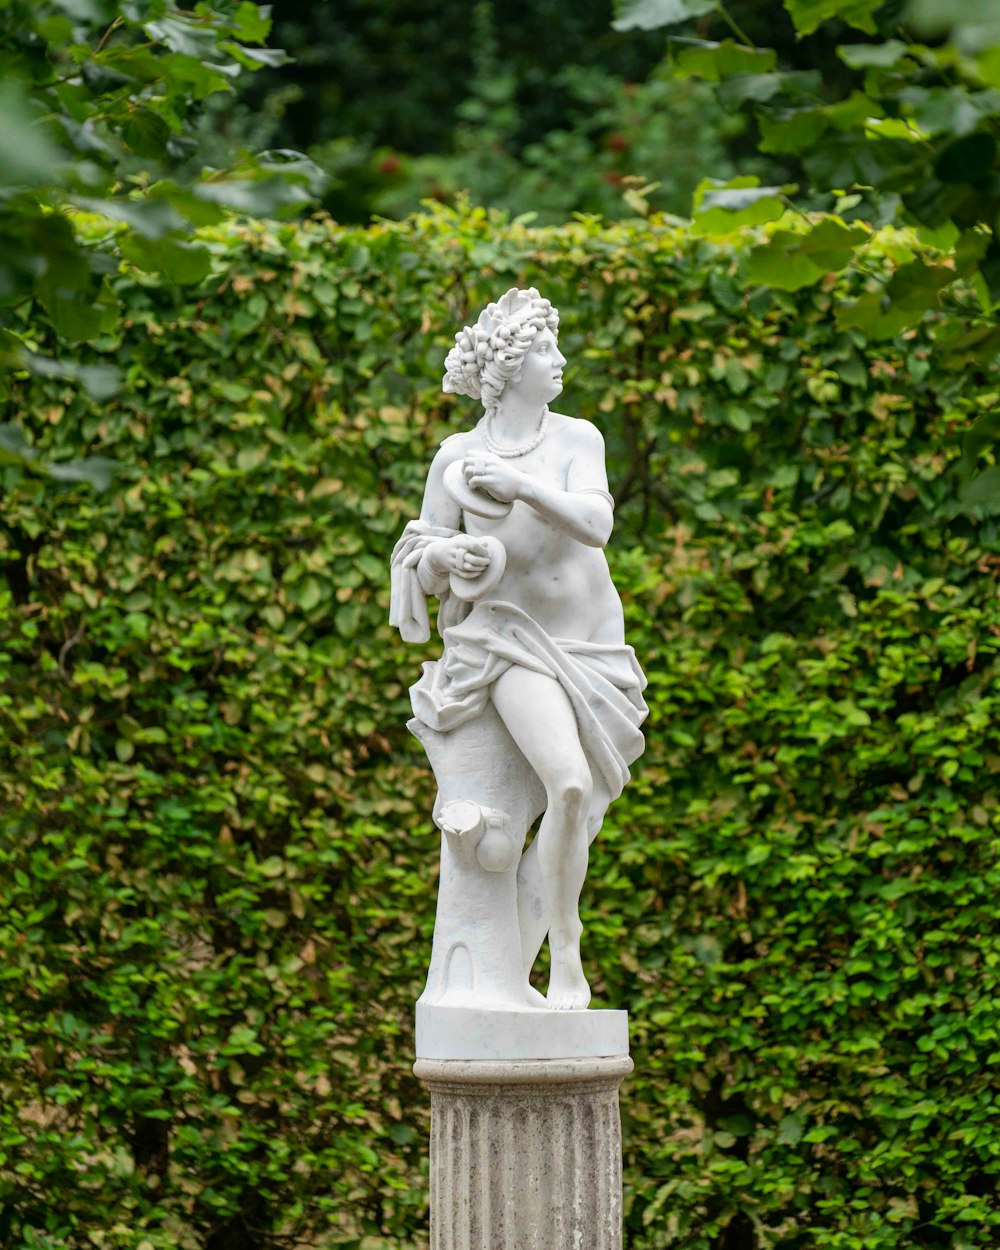 woman statue near green plants during daytime